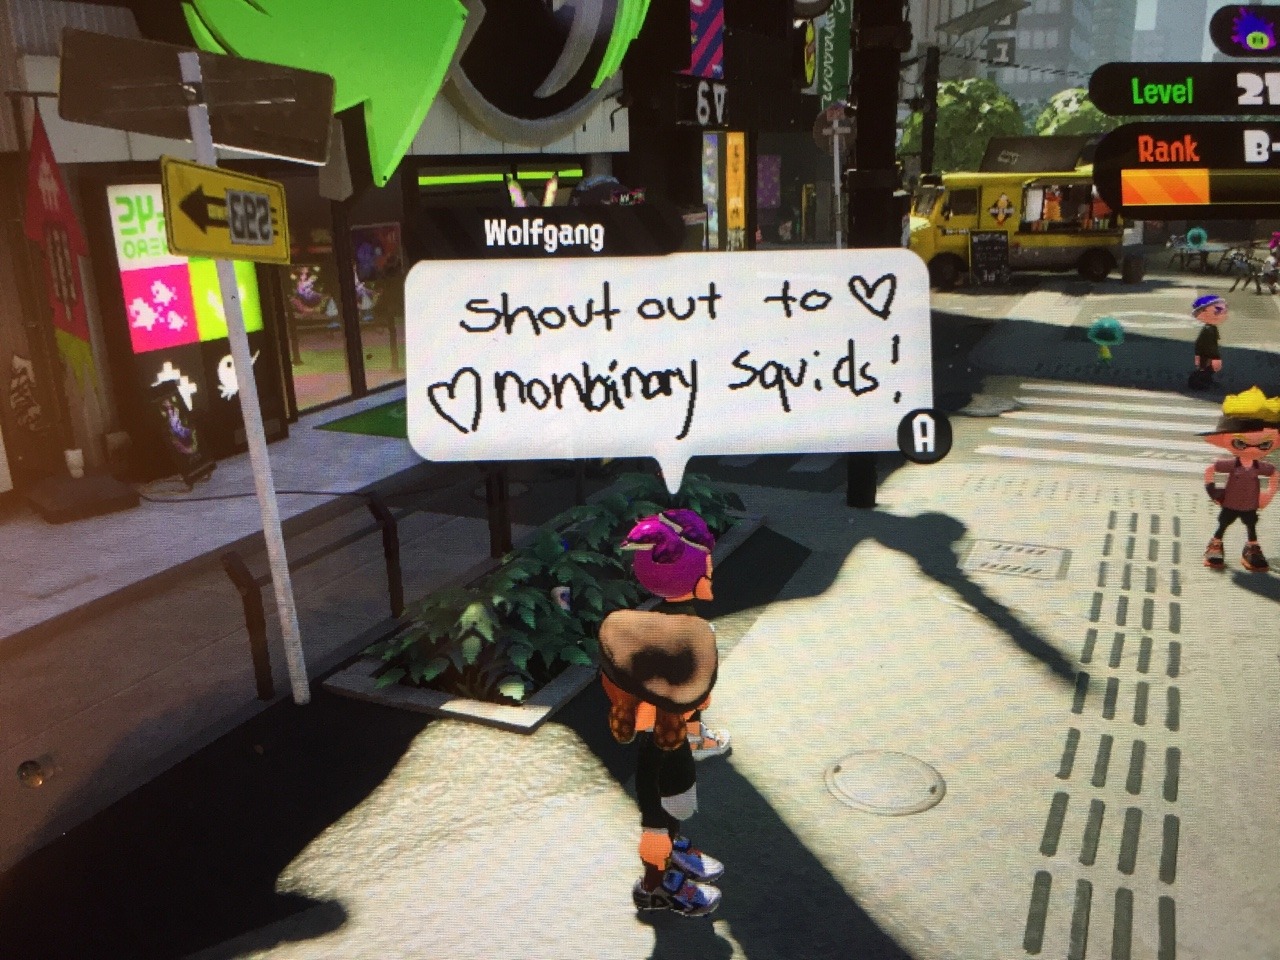 Splatoon 2’s Lobby Fills With LGBT Pride In Response To A Few Jerks